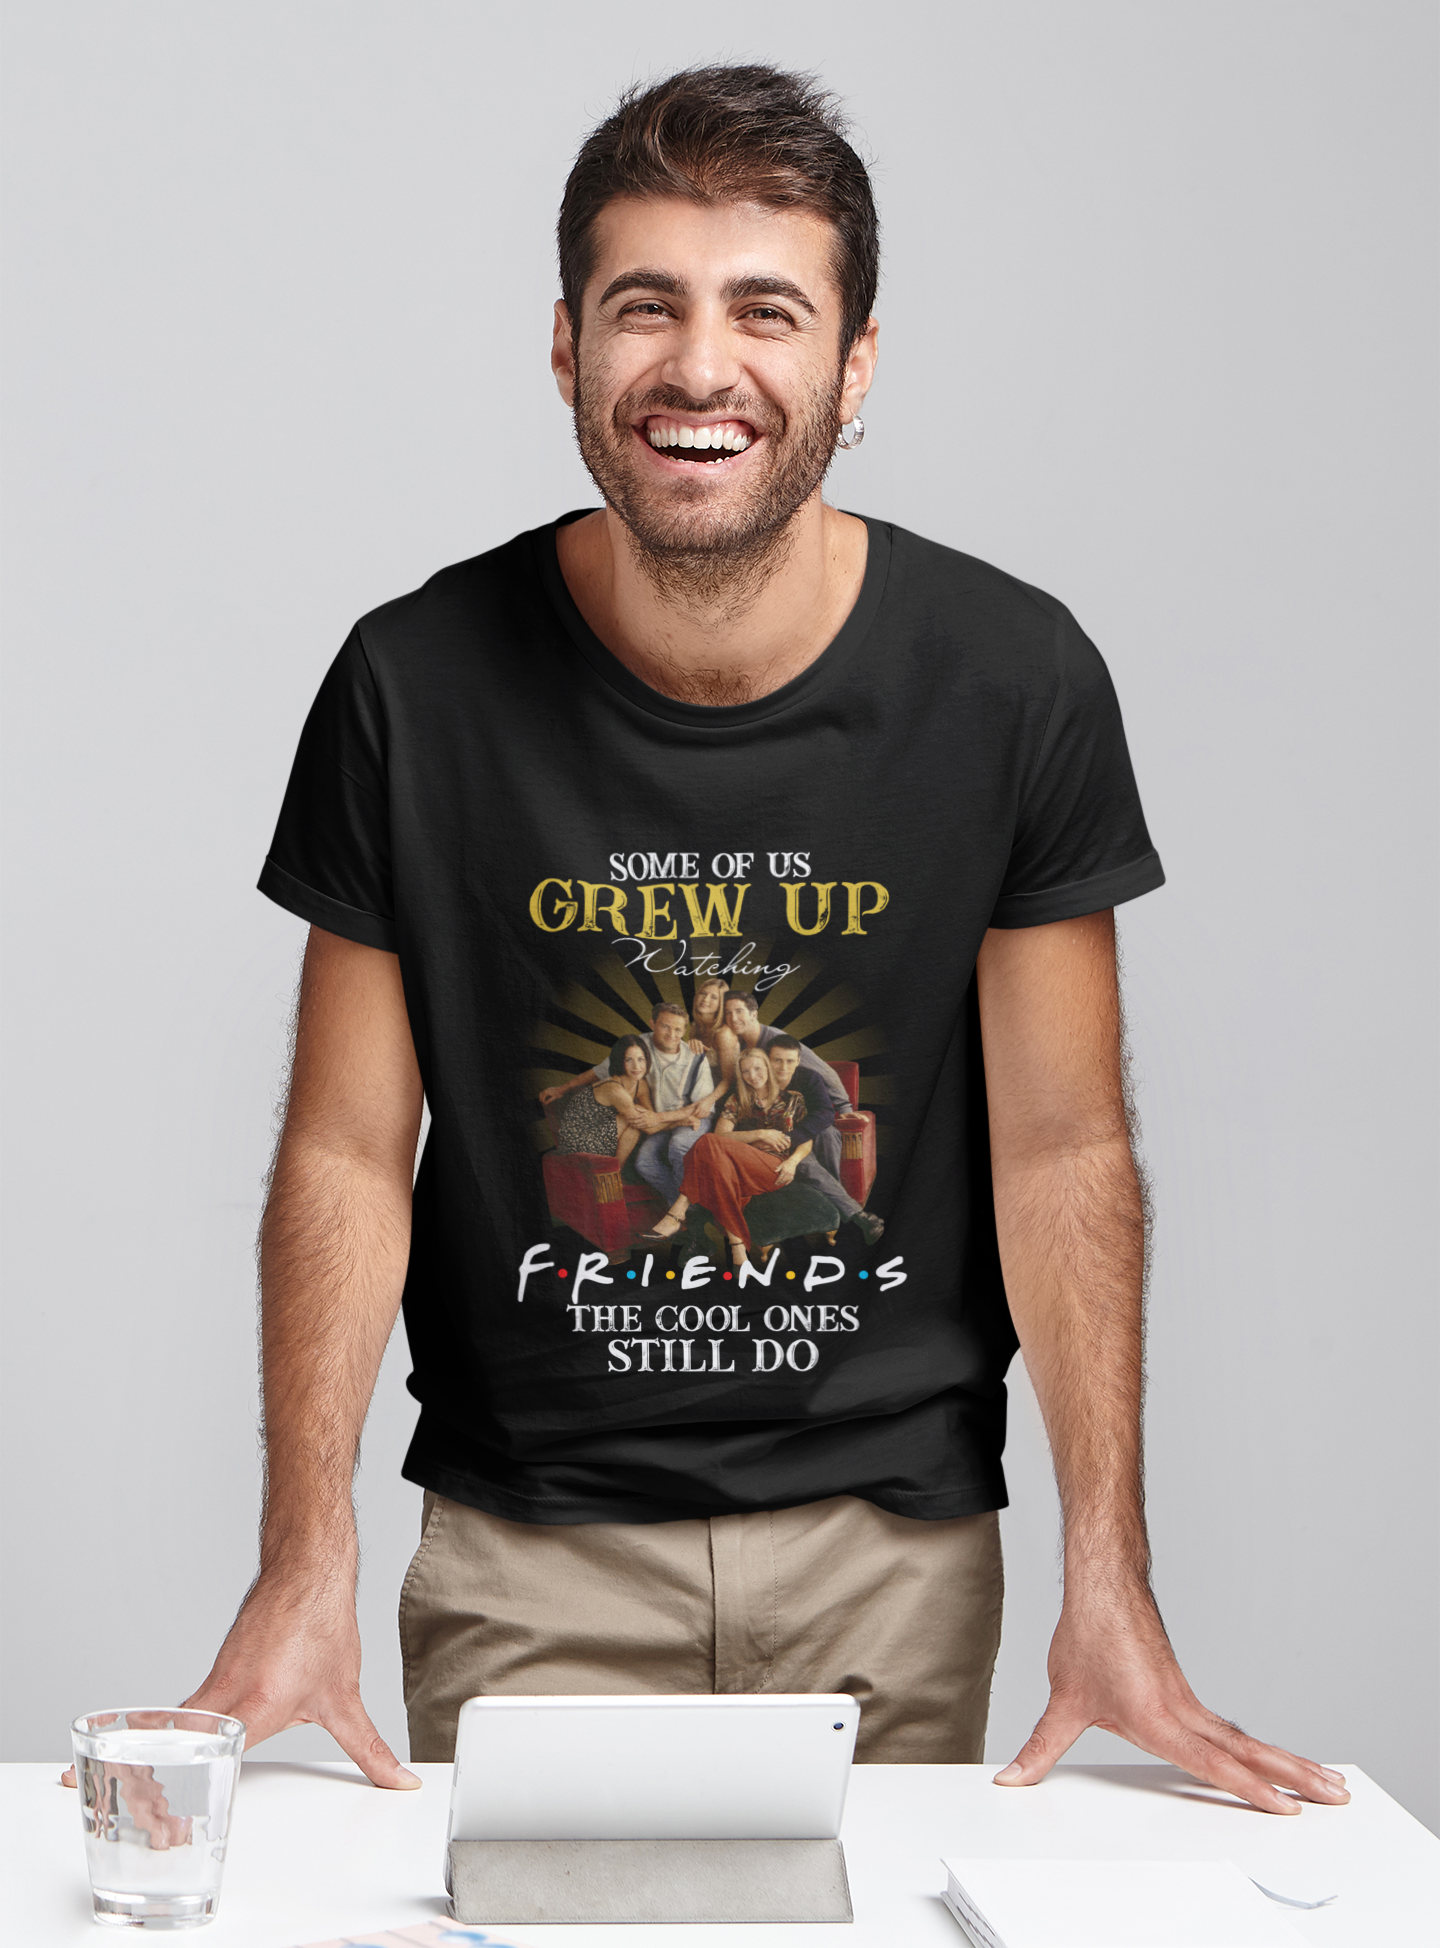 Friends TV Show T Shirt, Friends Characters T Shirt, Some Of Us Grew Up Watching Friends The Cool Ones Still Do Tshirt